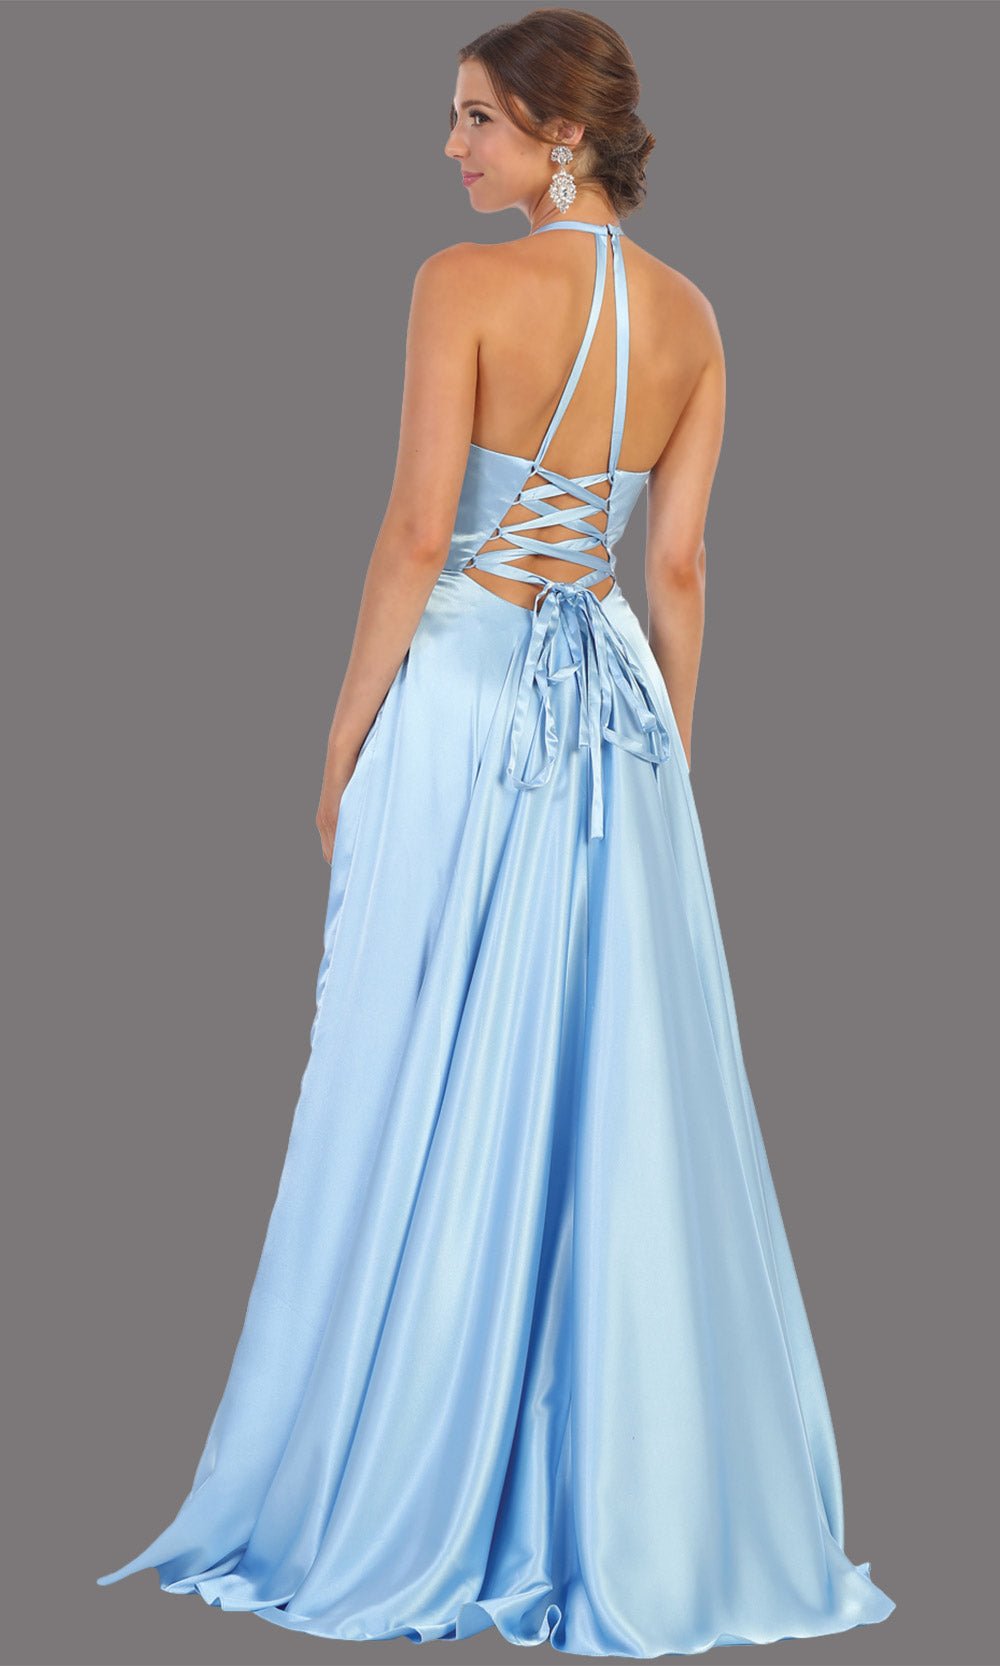 Mayqueen MQ1733 long perry blue satin high neck dress w/low back & high slit. This light blue formal evening dress is perfect for bridesmaid dresses, prom, wedding guest dress, evening party dress. Plus sizes avail-back